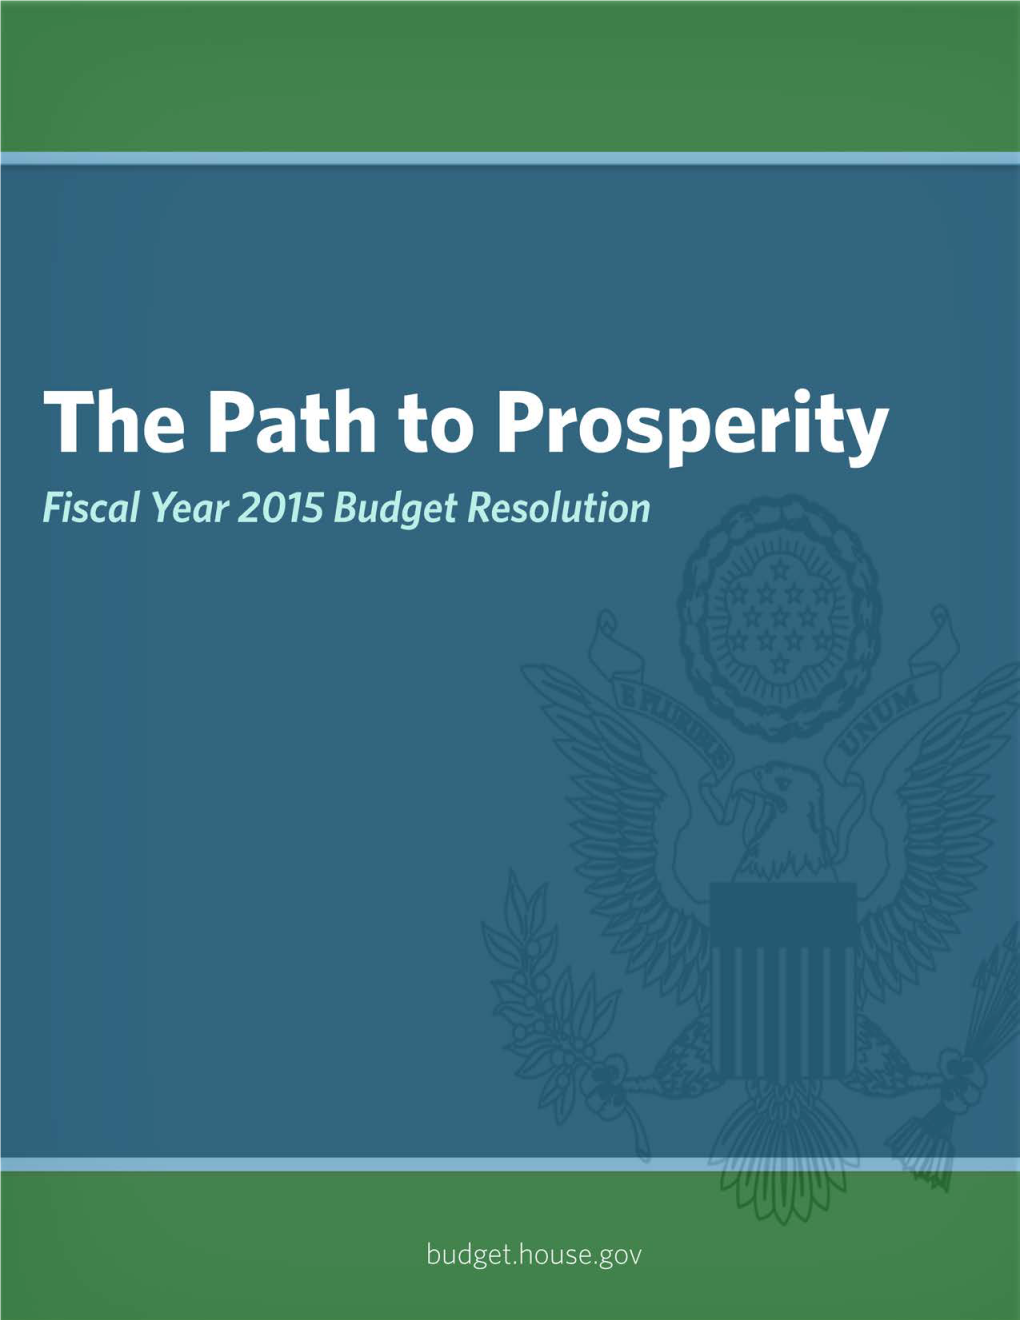 The Path to Prosperity: Fiscal Year 2015 Budget Resolution